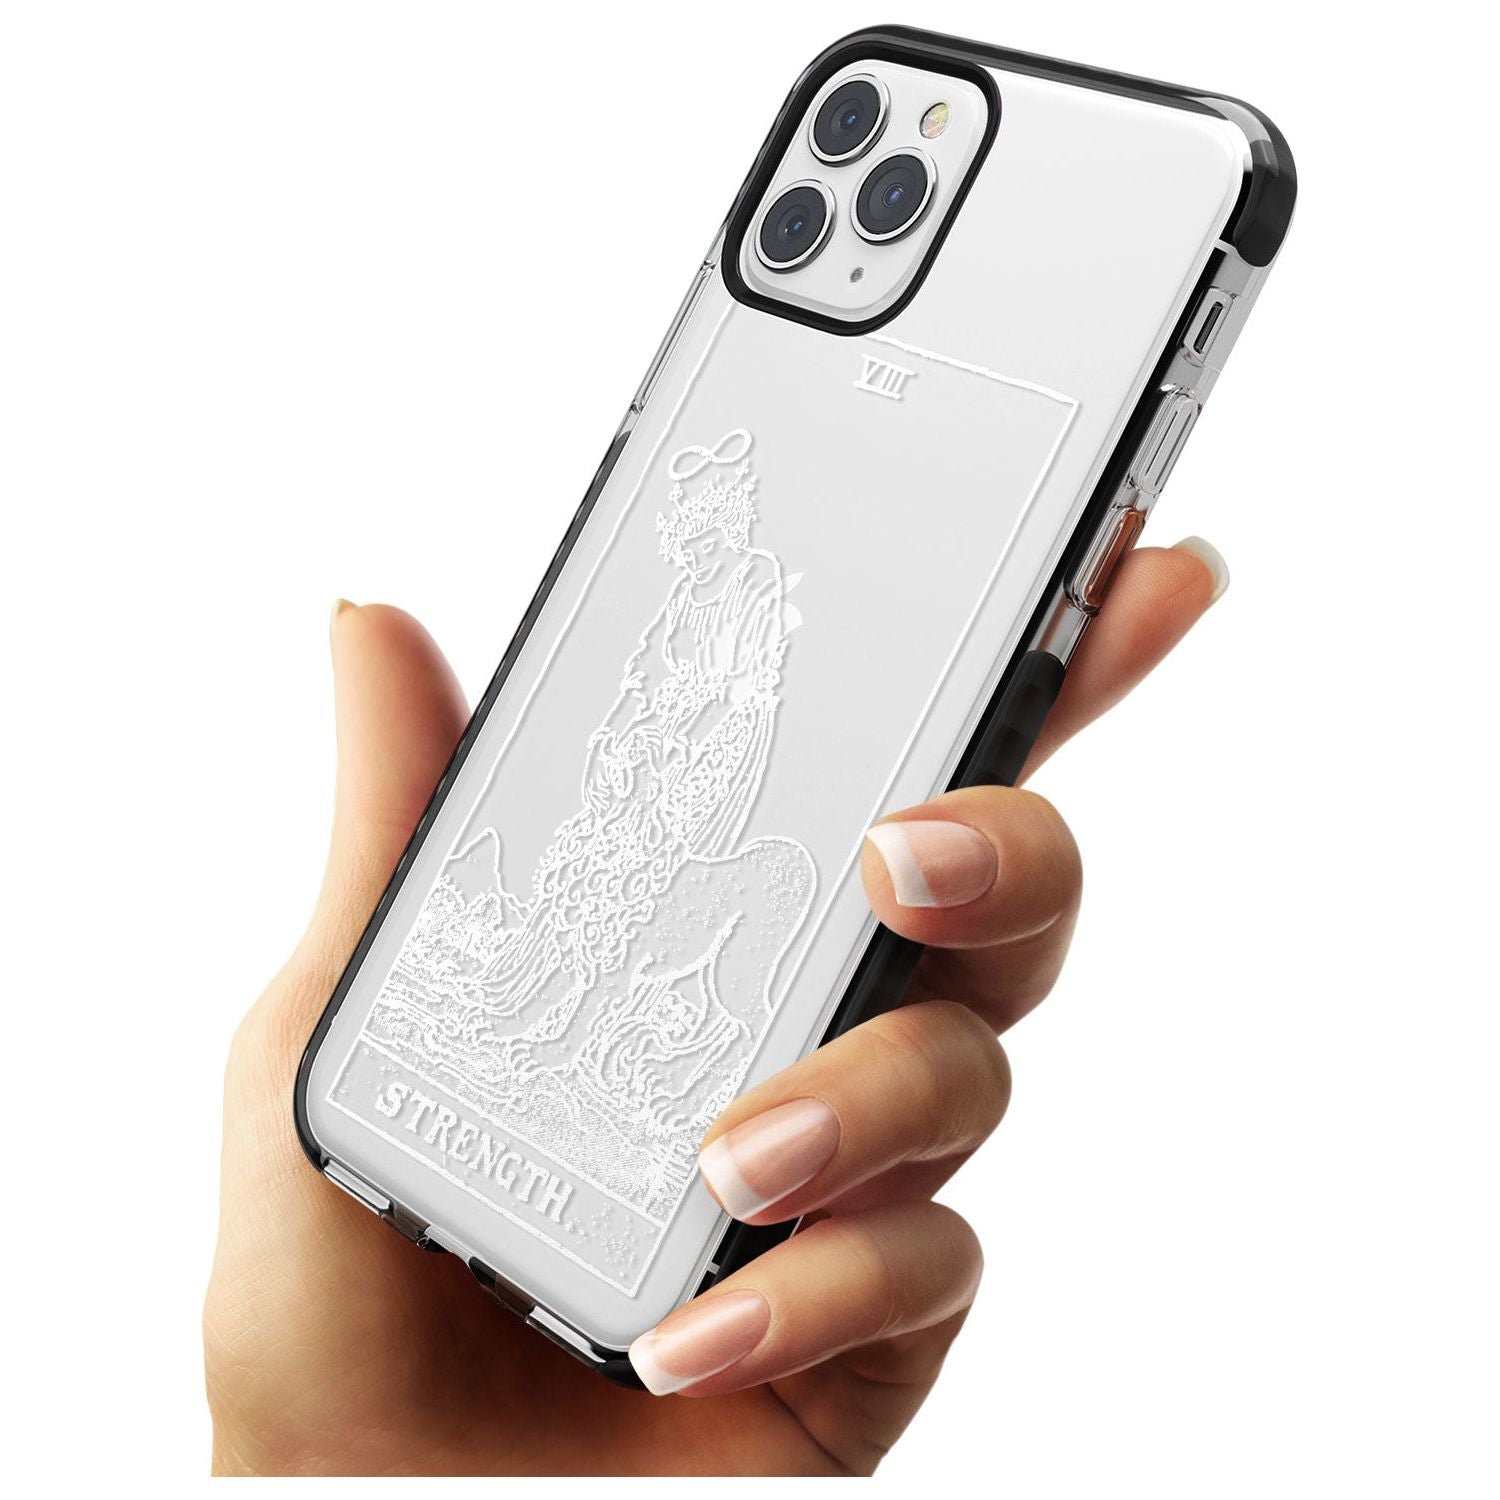 Strength Tarot Card - White Transparent Pink Fade Impact Phone Case for iPhone 11